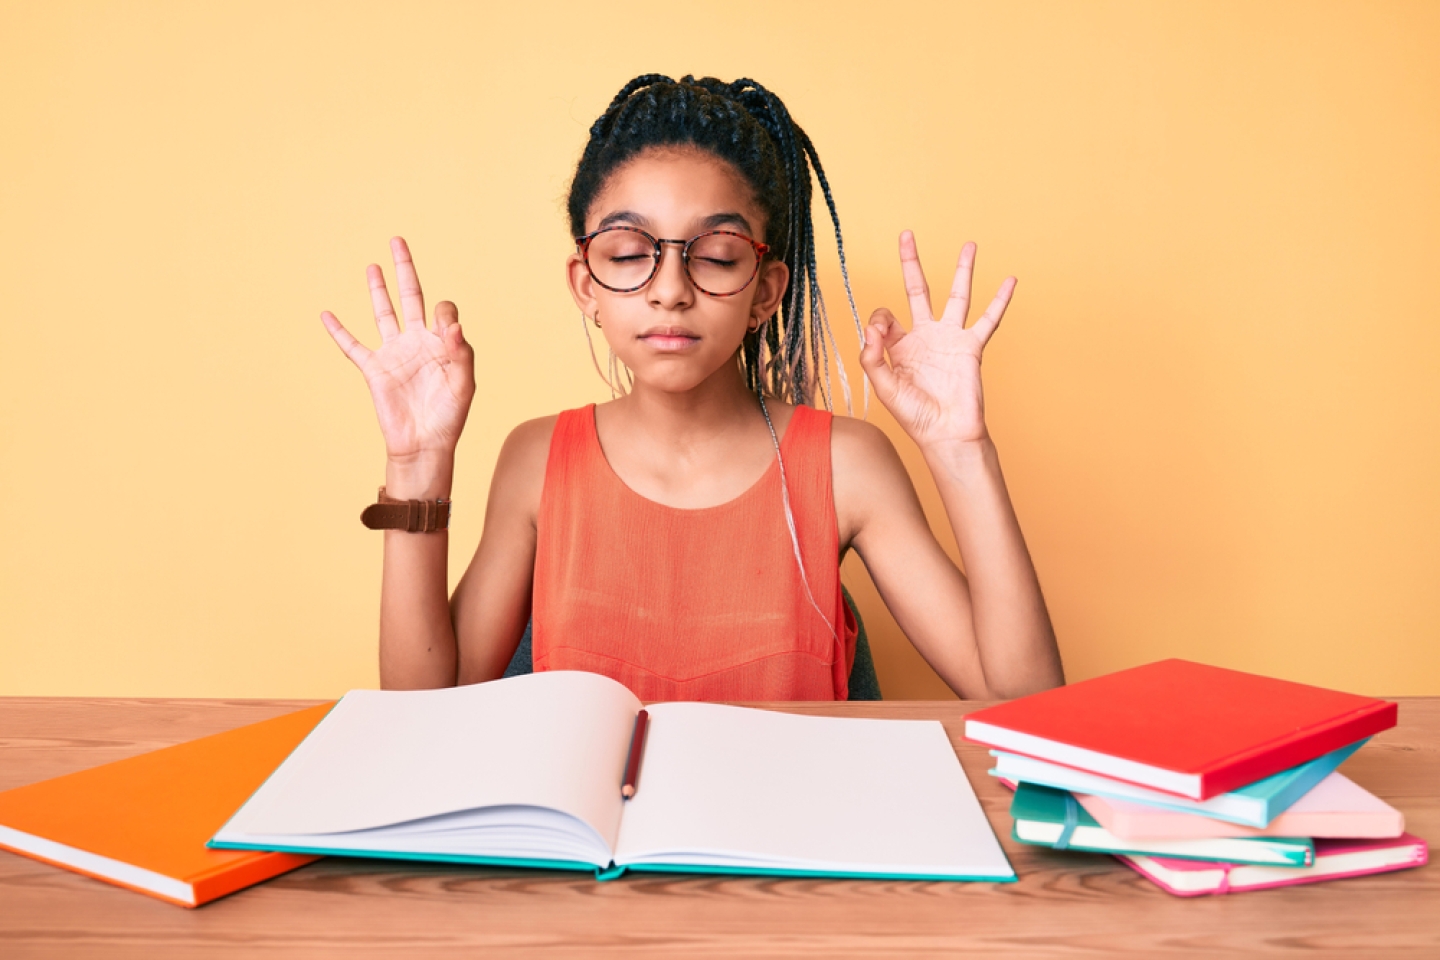 Young african american girl child with braids studying for school exam relax and smiling with eyes closed doing meditation gesture with fingers